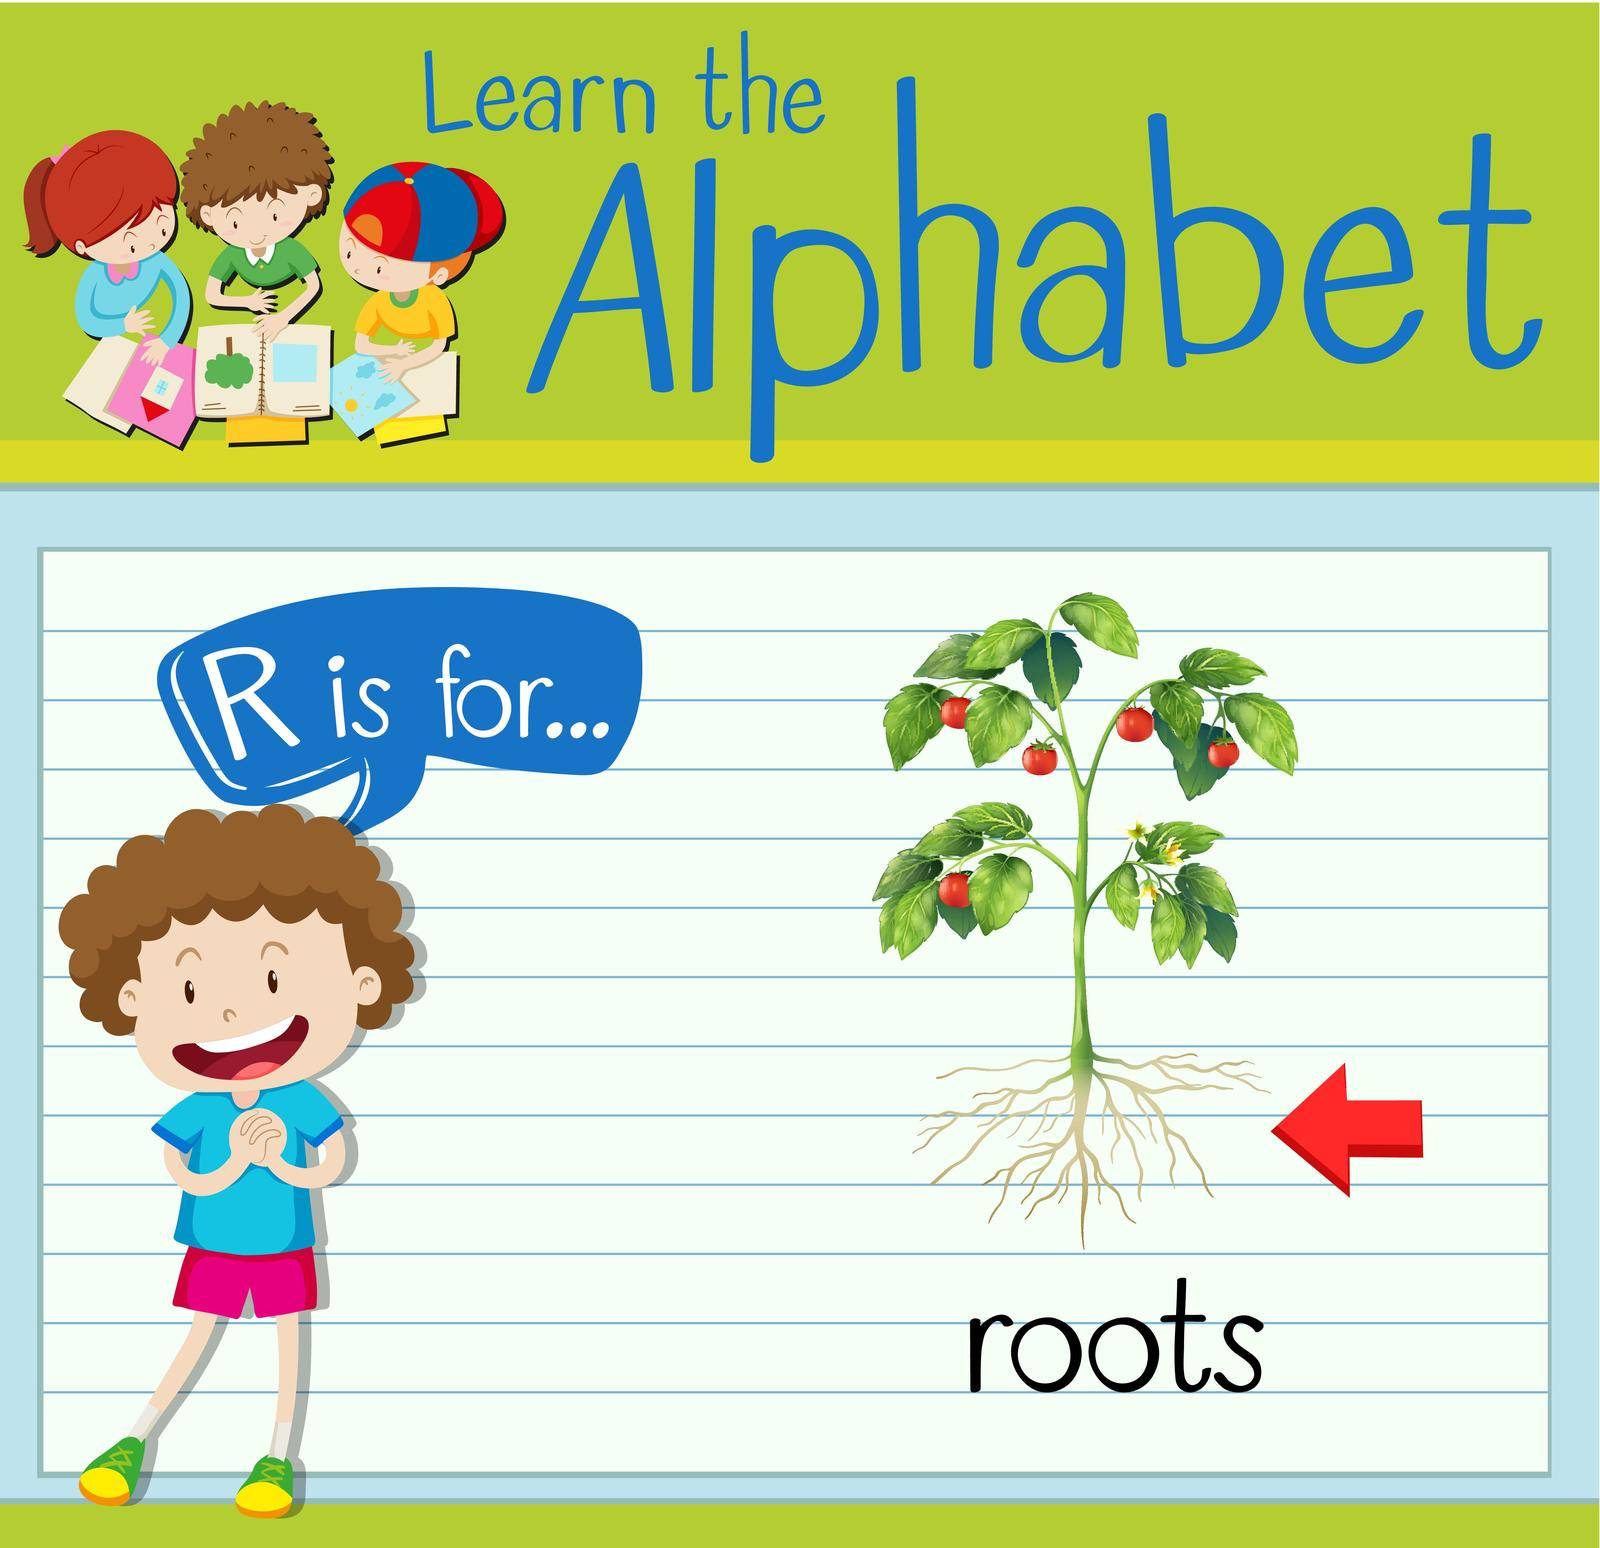 Flashcard letter R is for roots by iimages